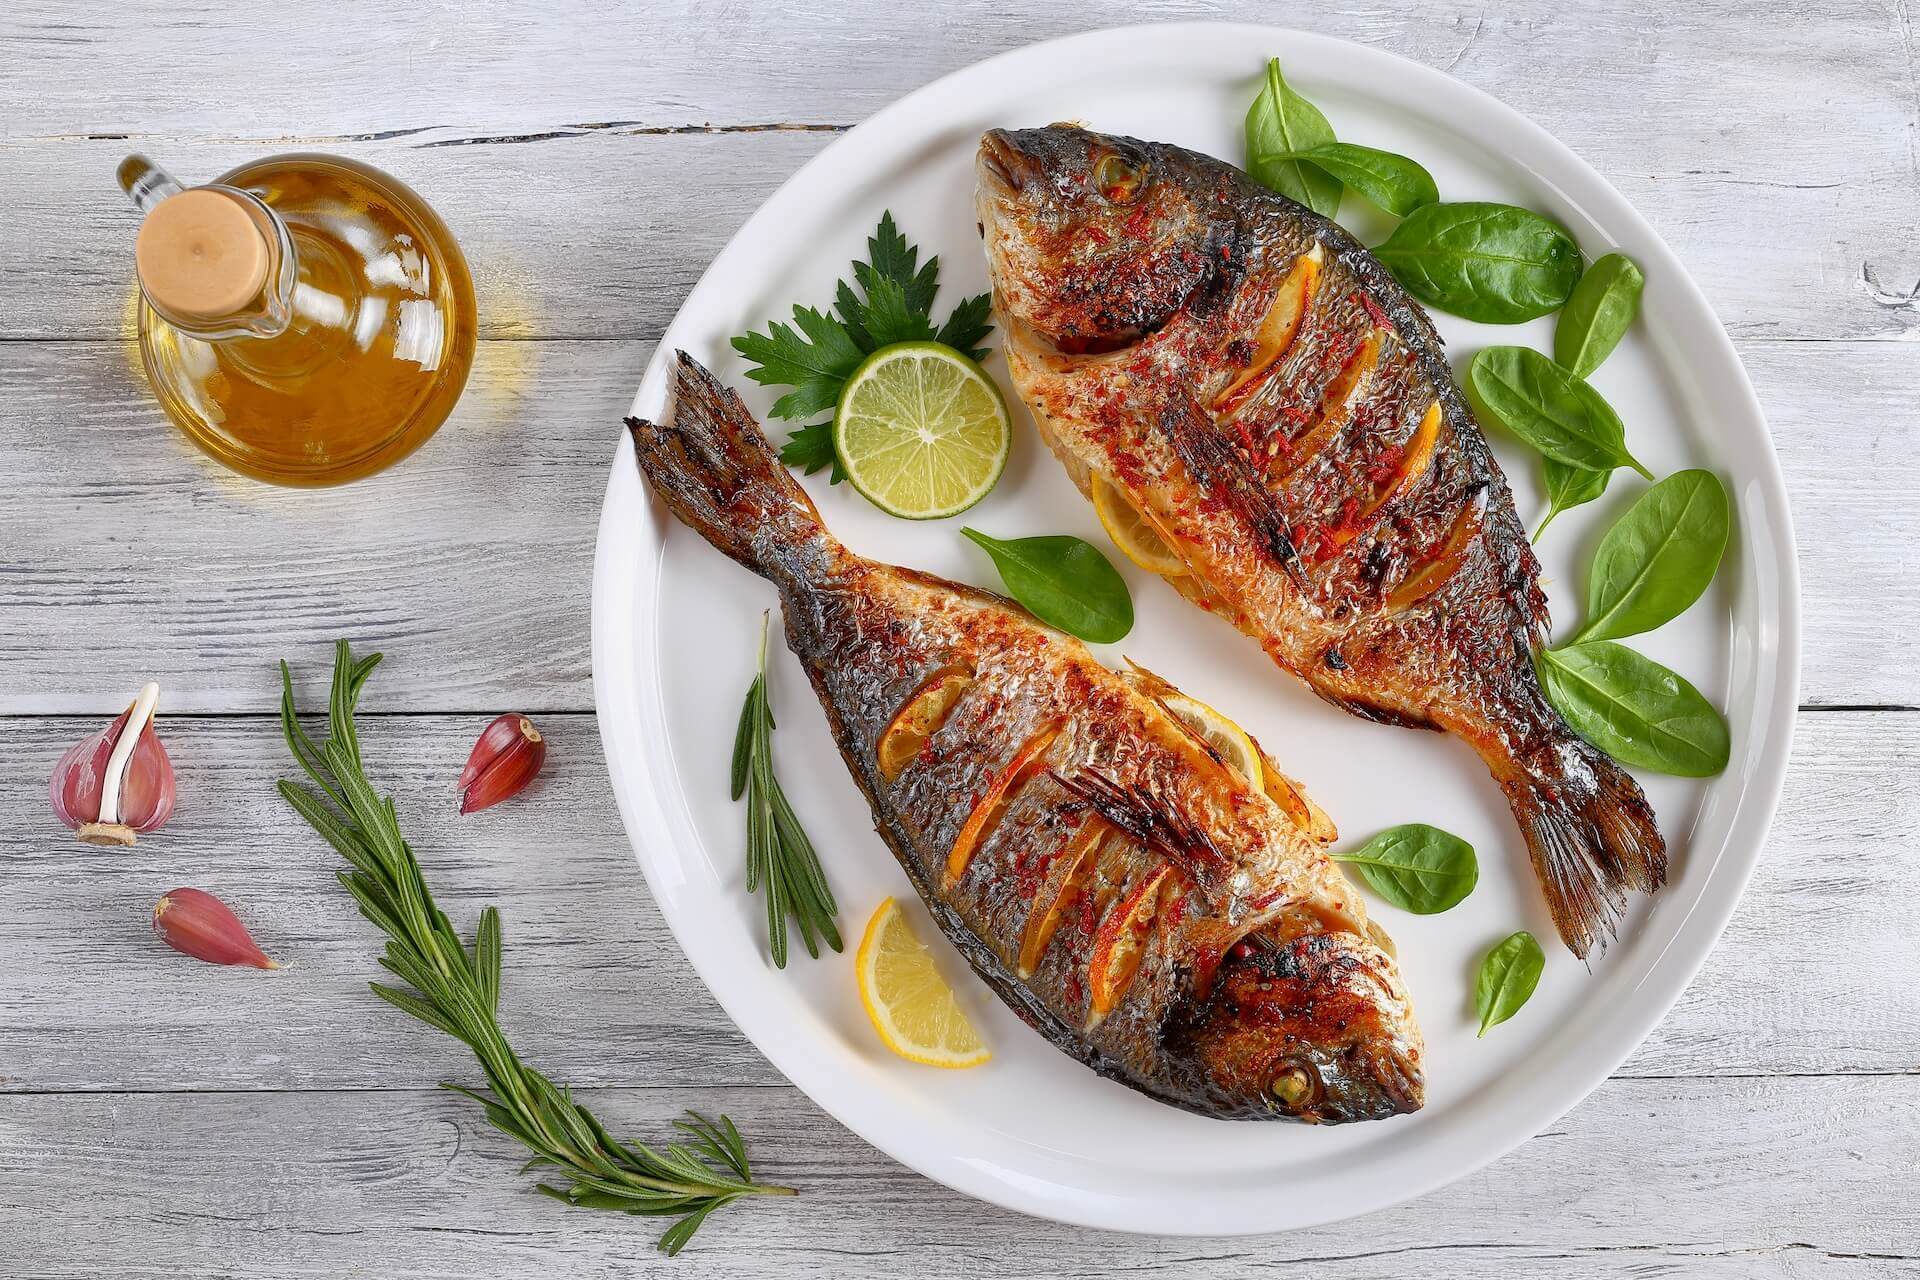 Grilled fish with lemon slices